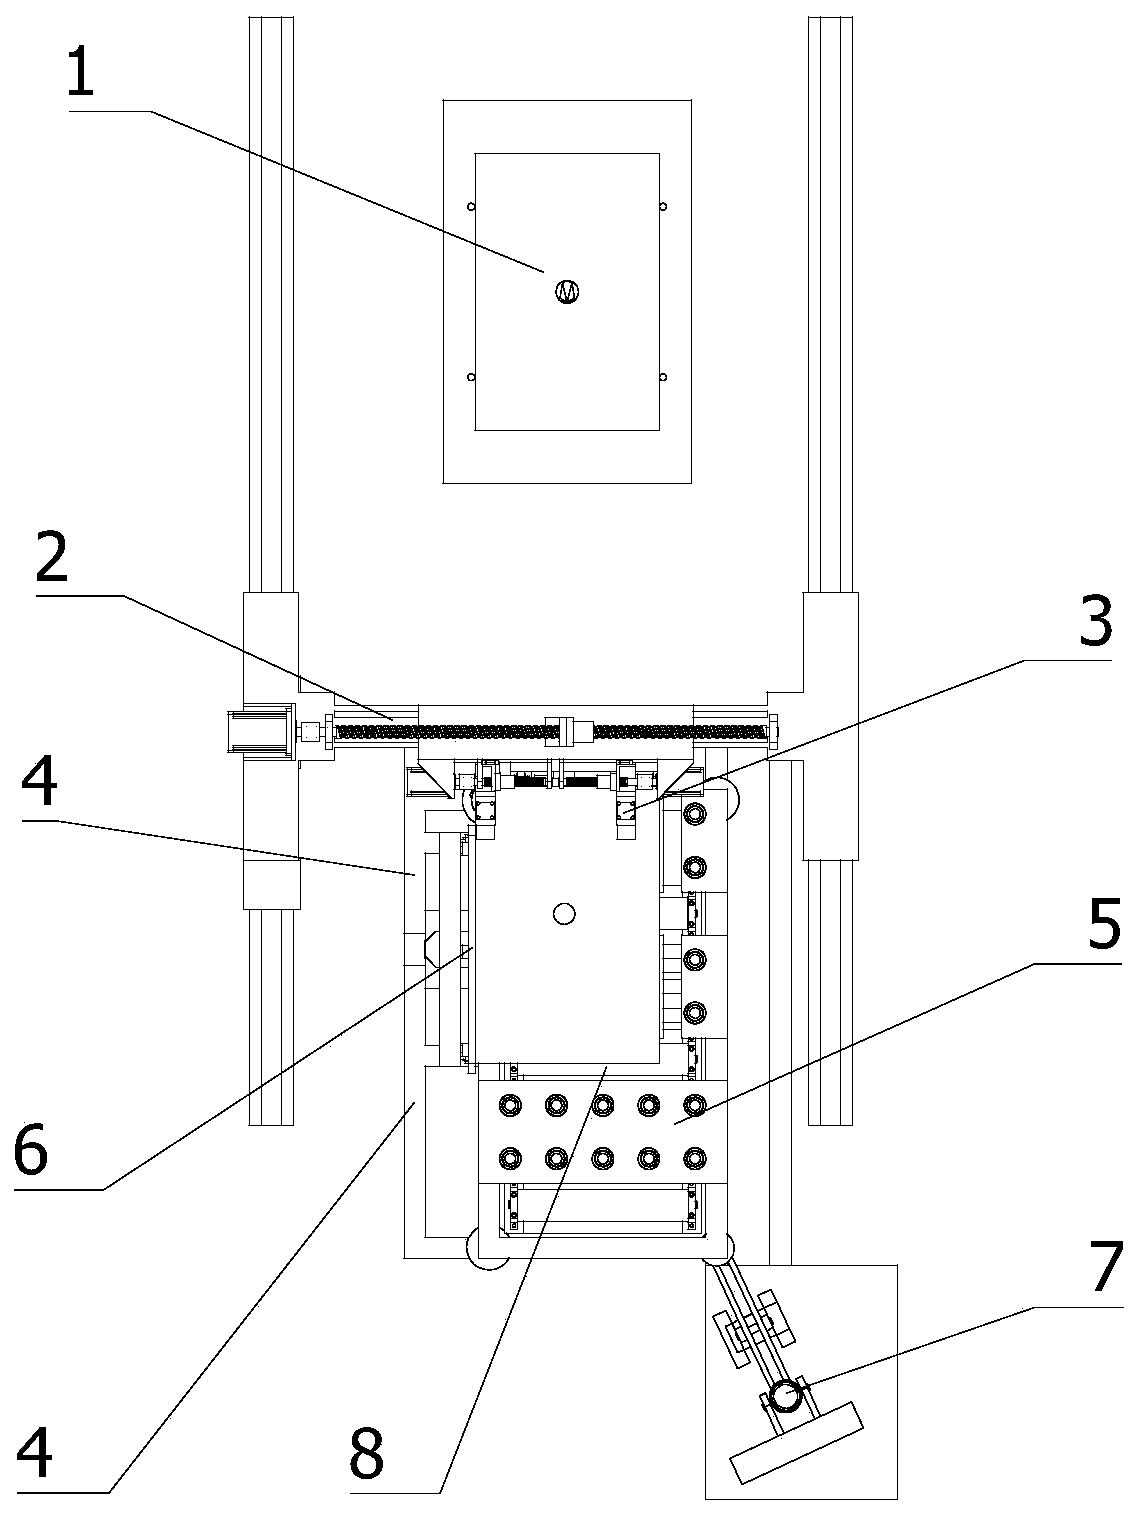 Automatic feeding platform for automatic assembling equipment for leaf springs